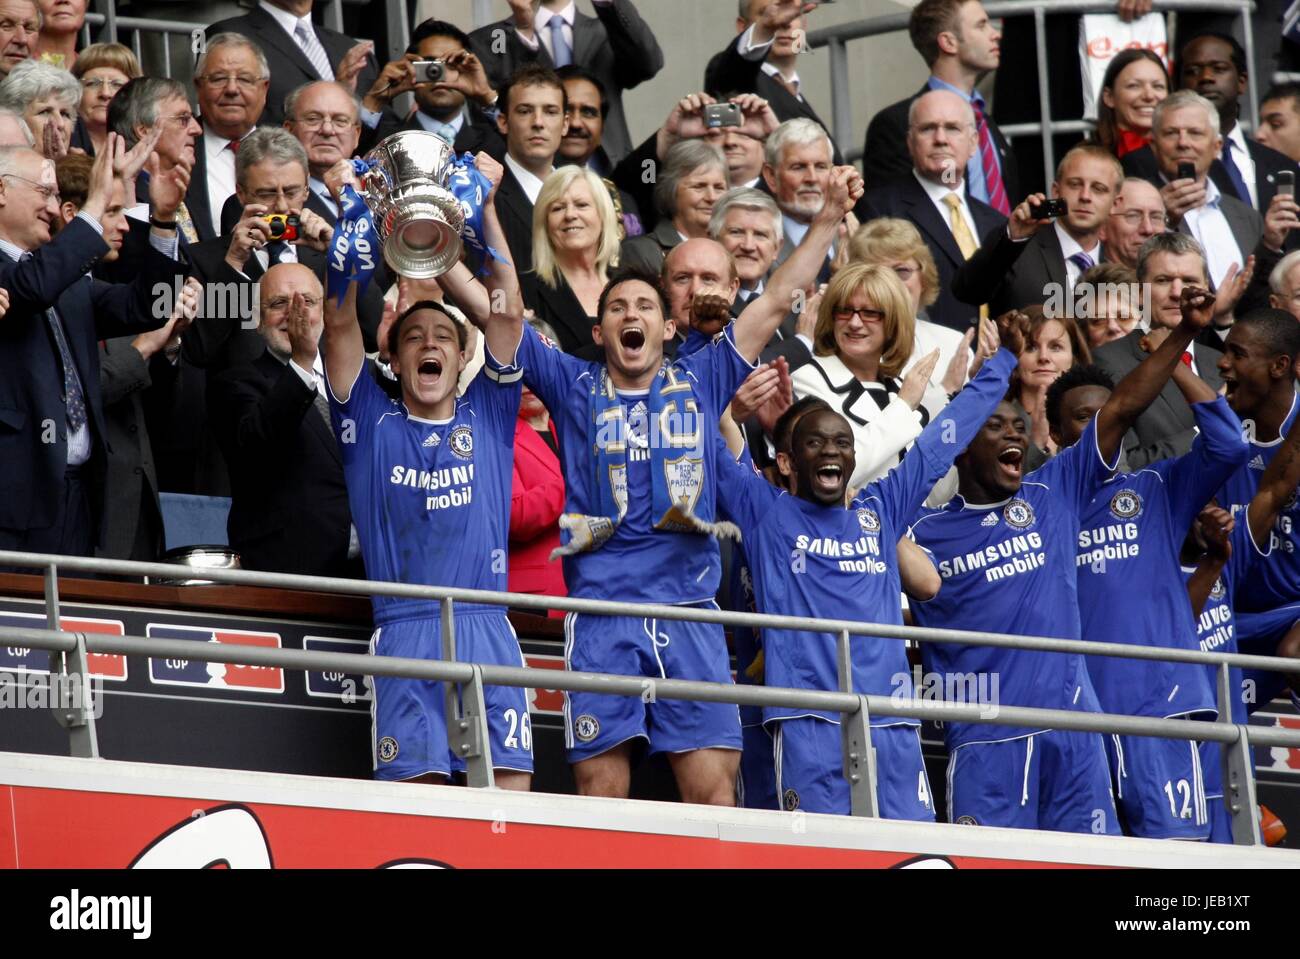 TERRY LAMPARD MAKELELE ESSIEN CHELSEA V MANCHESTER UNITED WEMBLEY STADIUM LONDON ENGLAND 19 May 2007 Stock Photo